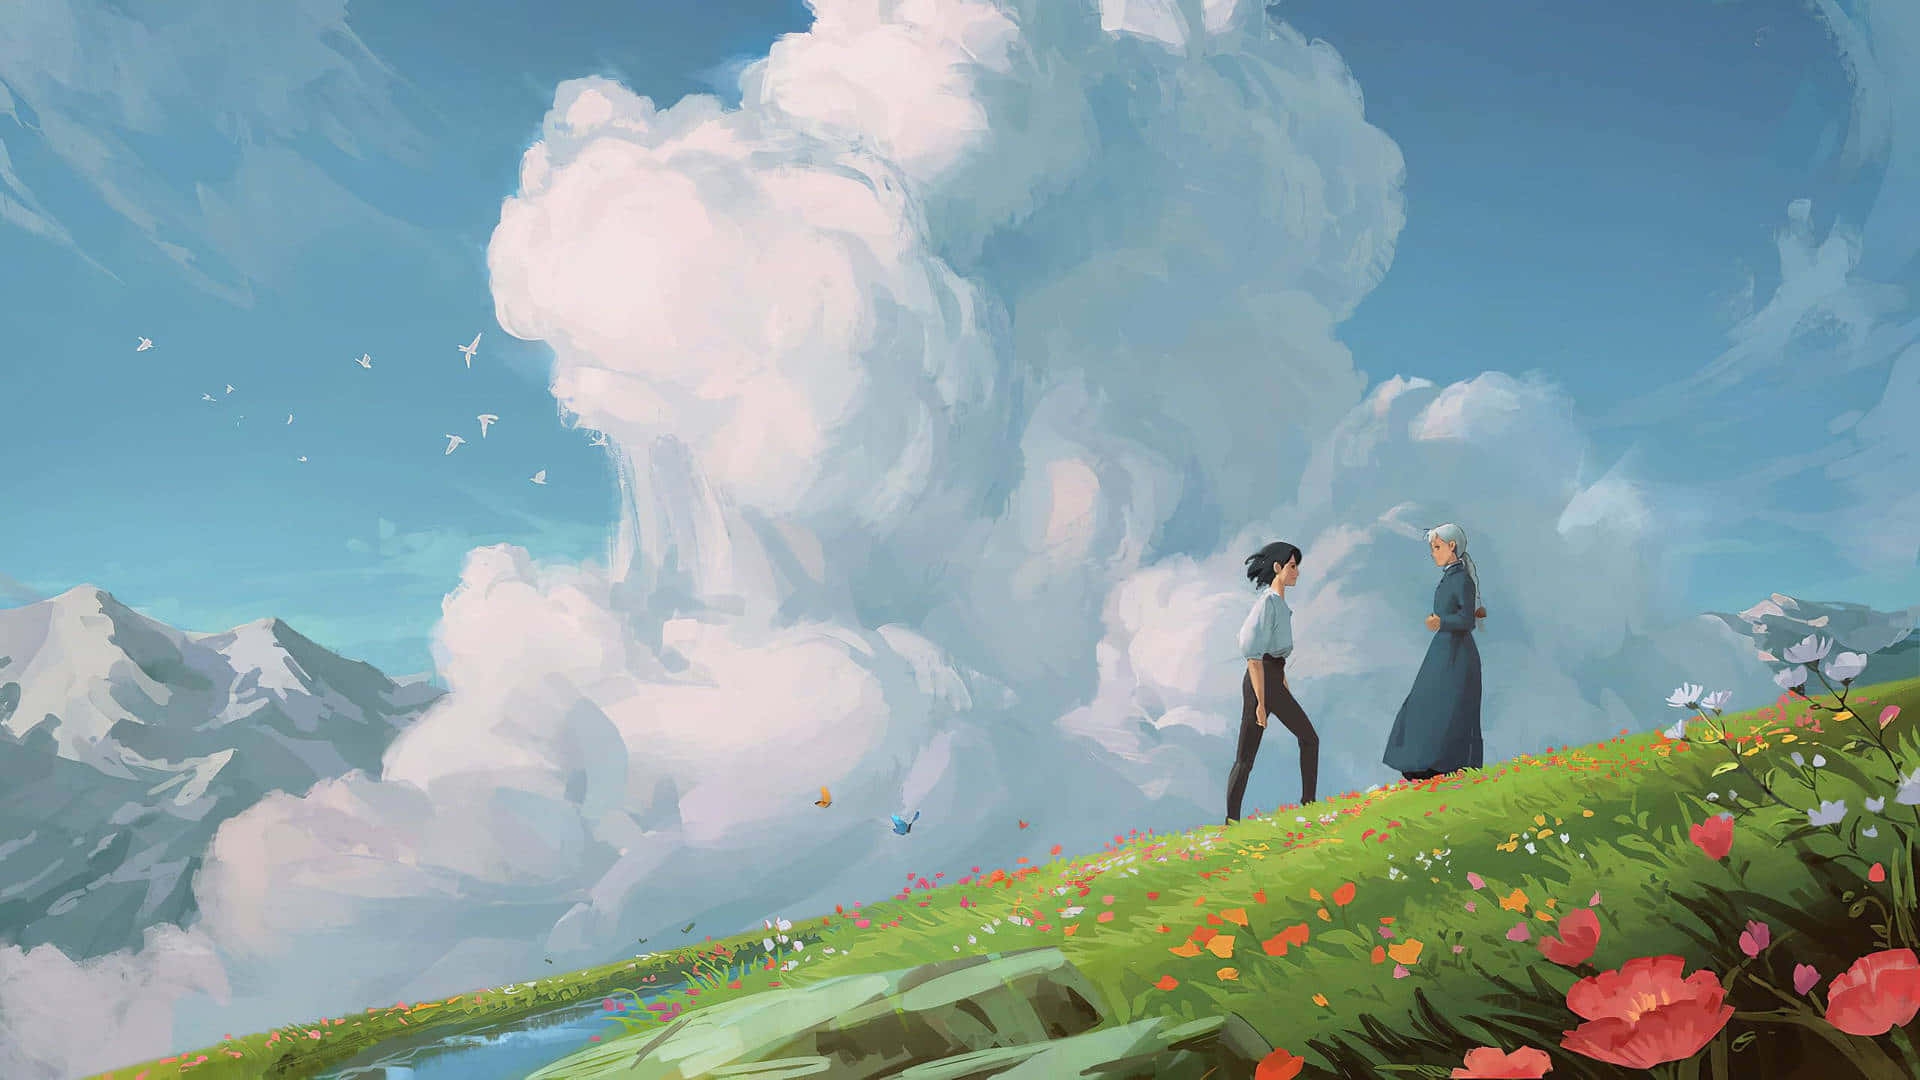 Download Explore the enchanted world of Aesthetic Ghibli Wallpaper